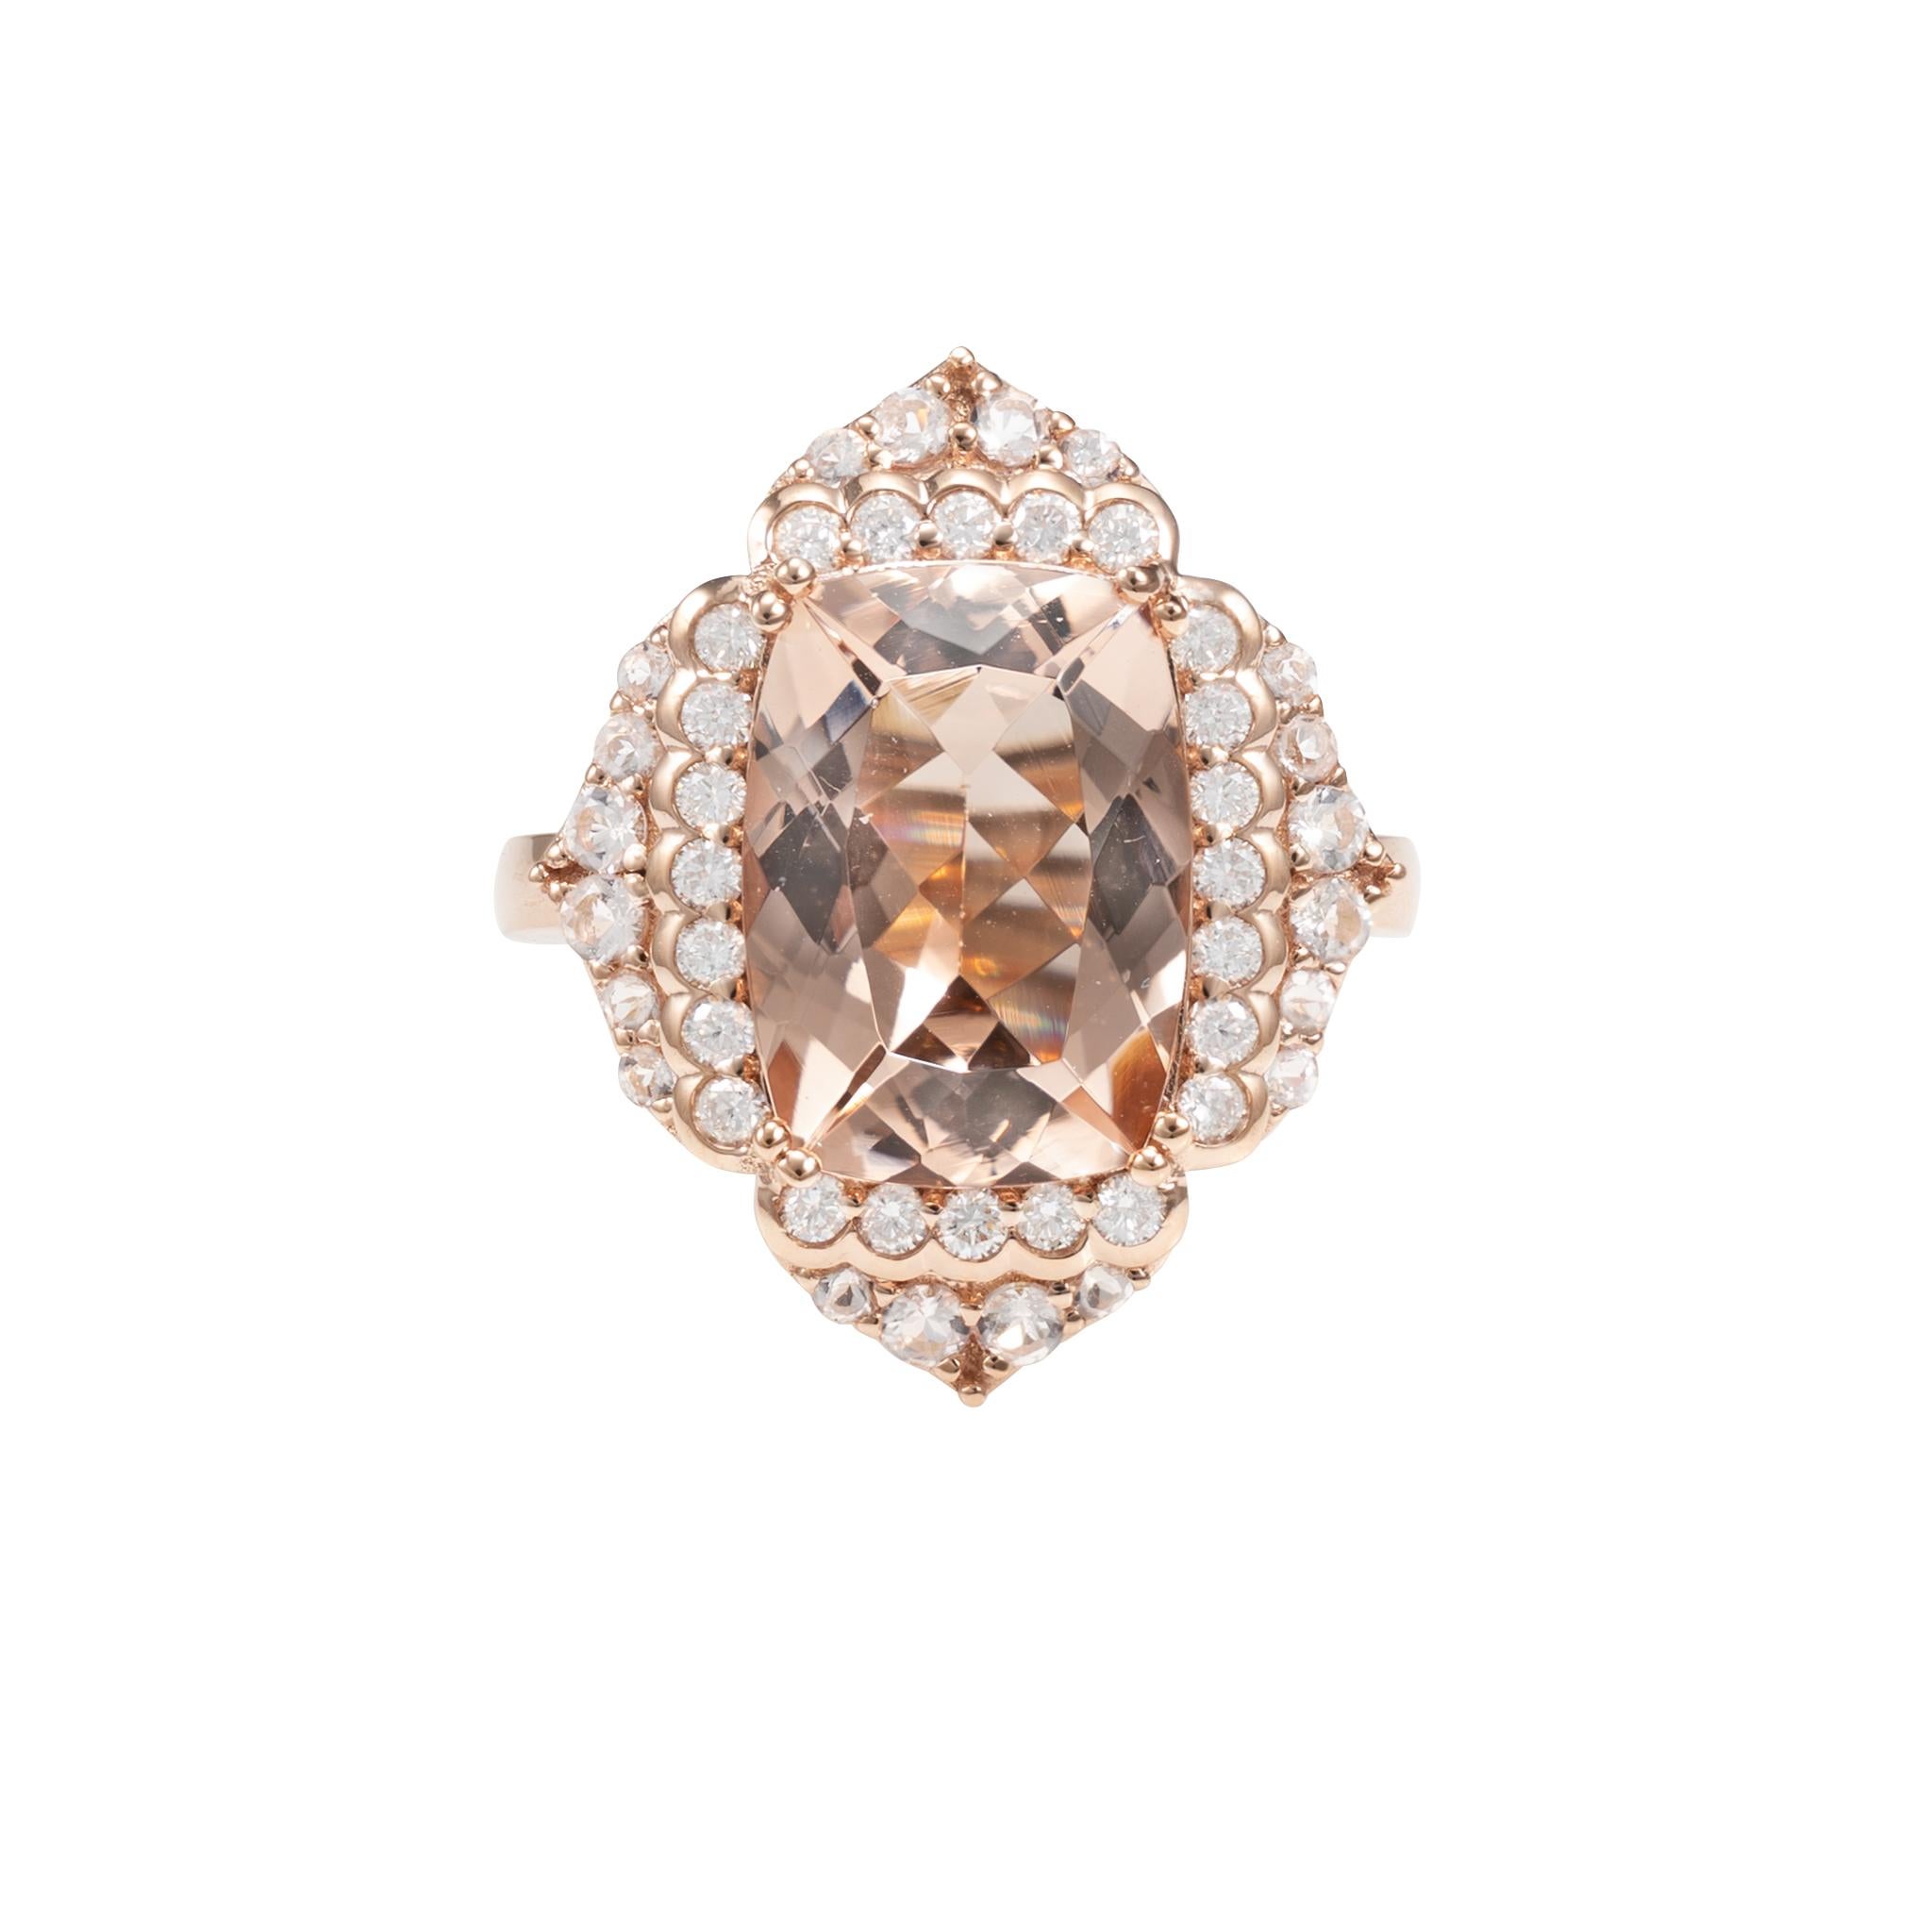 Contemporary 5.71 Carat Morganite and White Diamond Ring in 18 Karat Rose Gold For Sale